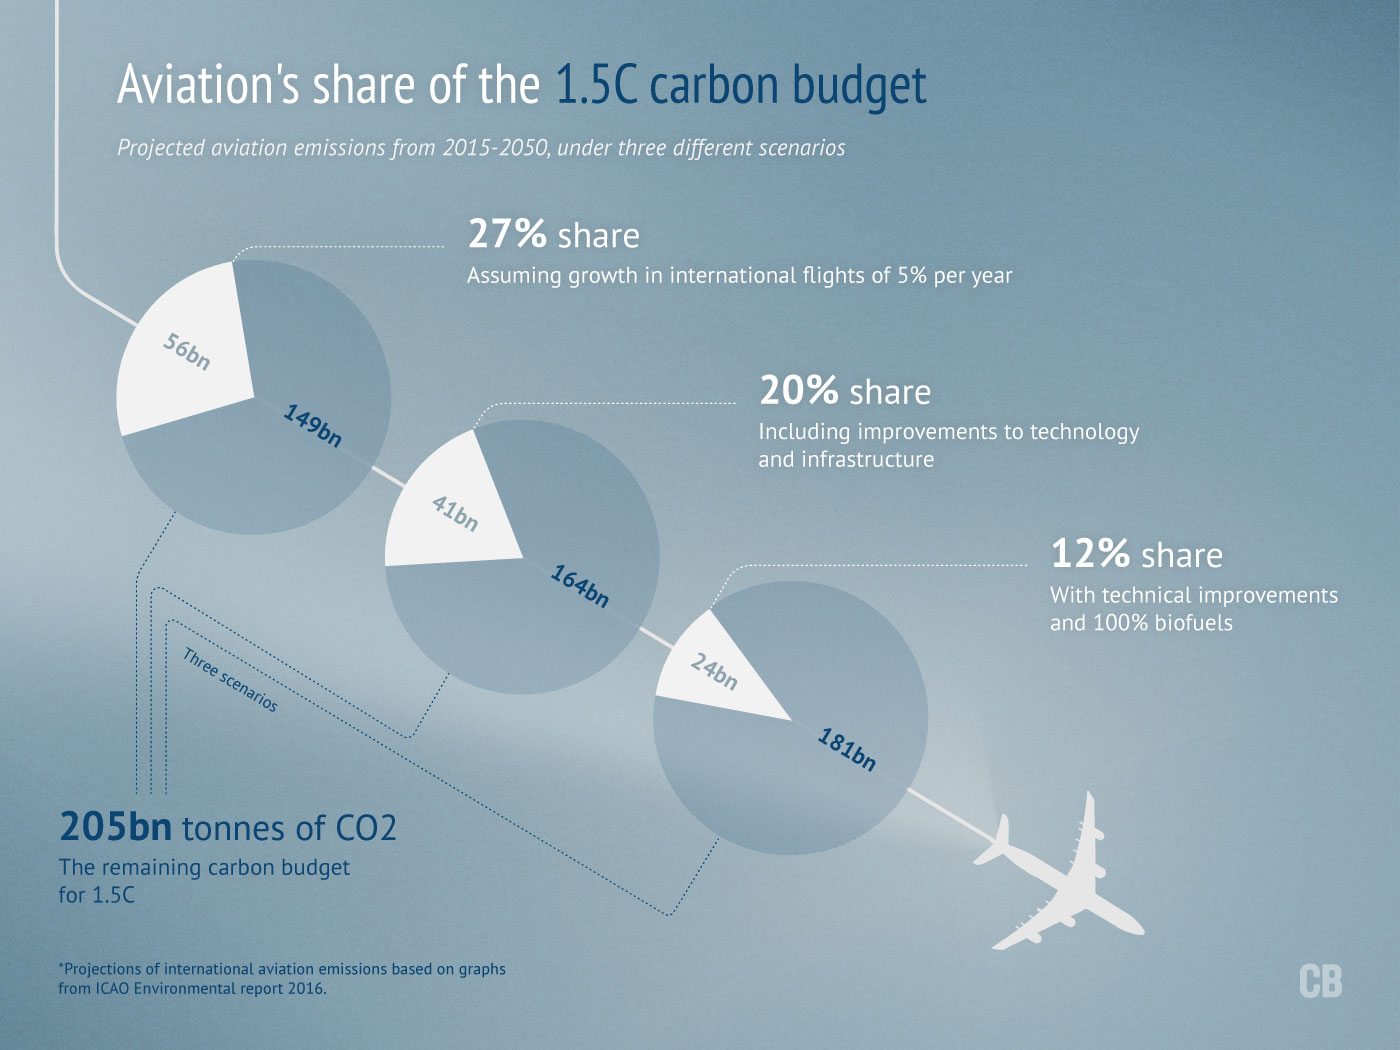 Aviation emissions - share of the 1.5 deg C carbon budget; Carbon Brief (2016)